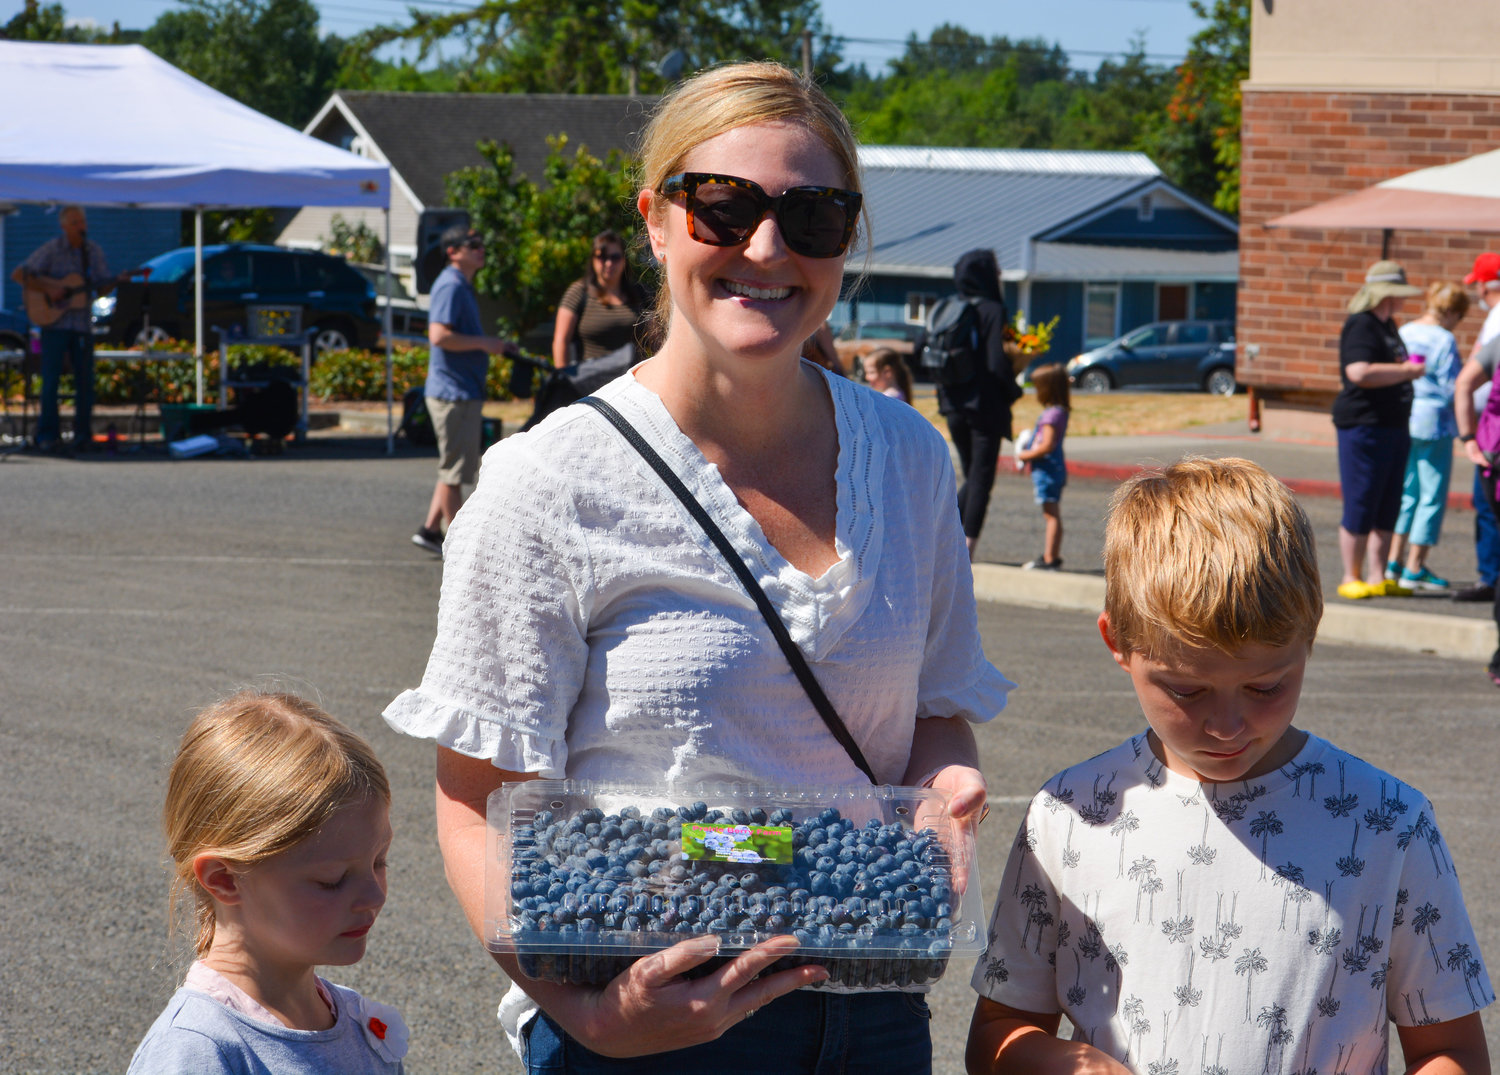 Vendors local to Hockinson and Clark County set up shop during the second annual Hockinson Blueberry Festival on July 17